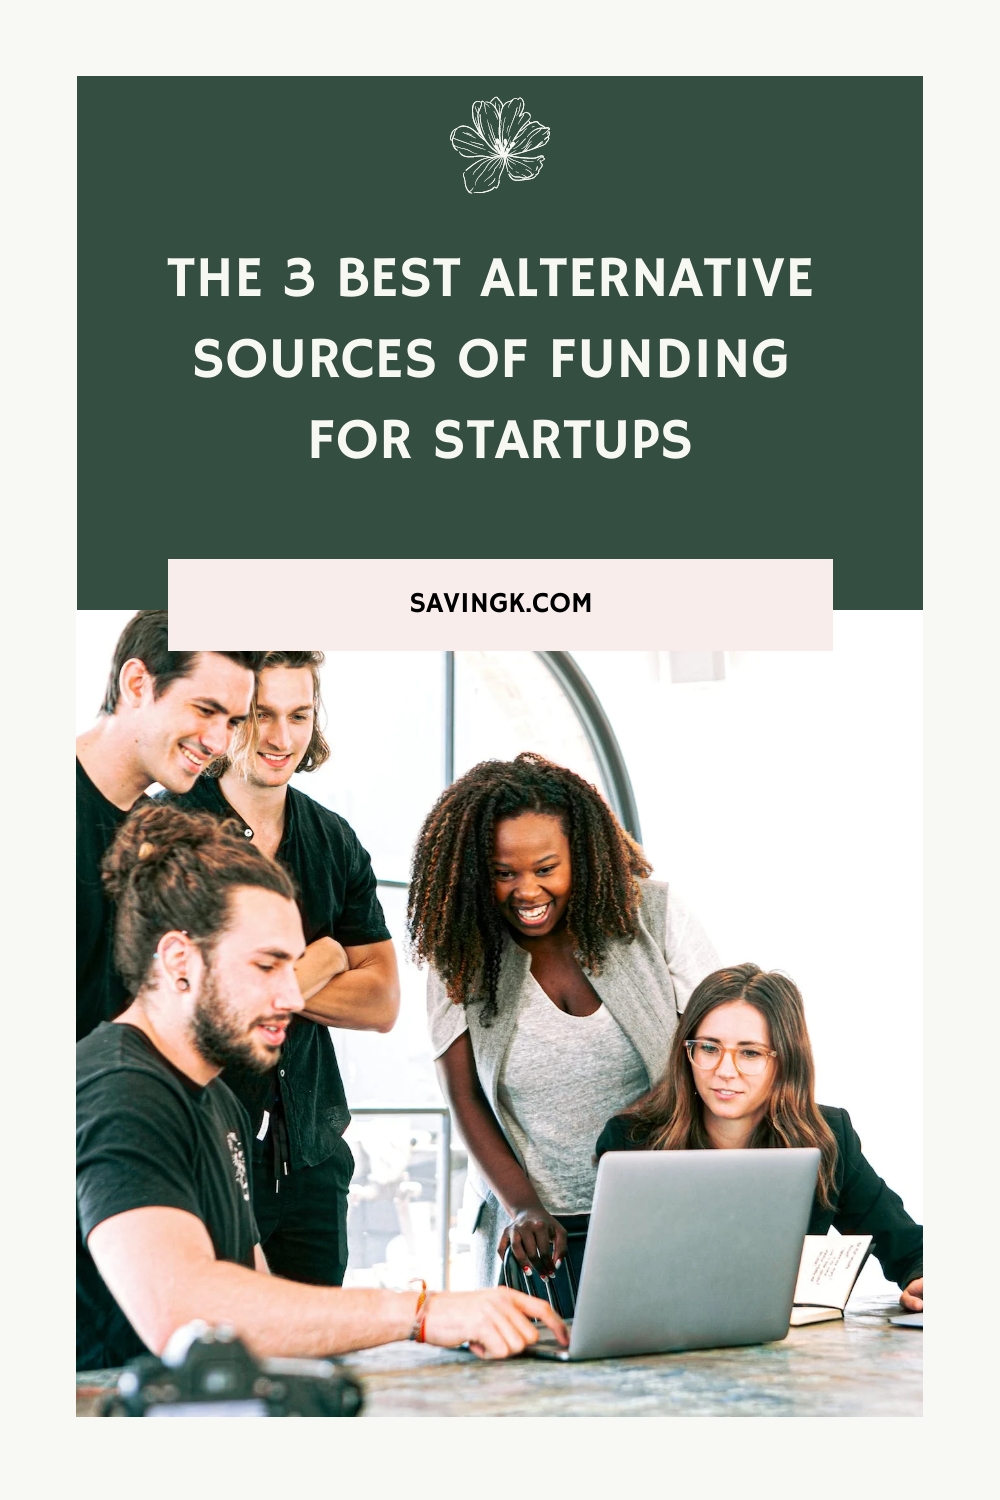 The 3 Best Alternative Sources of Funding for Startups